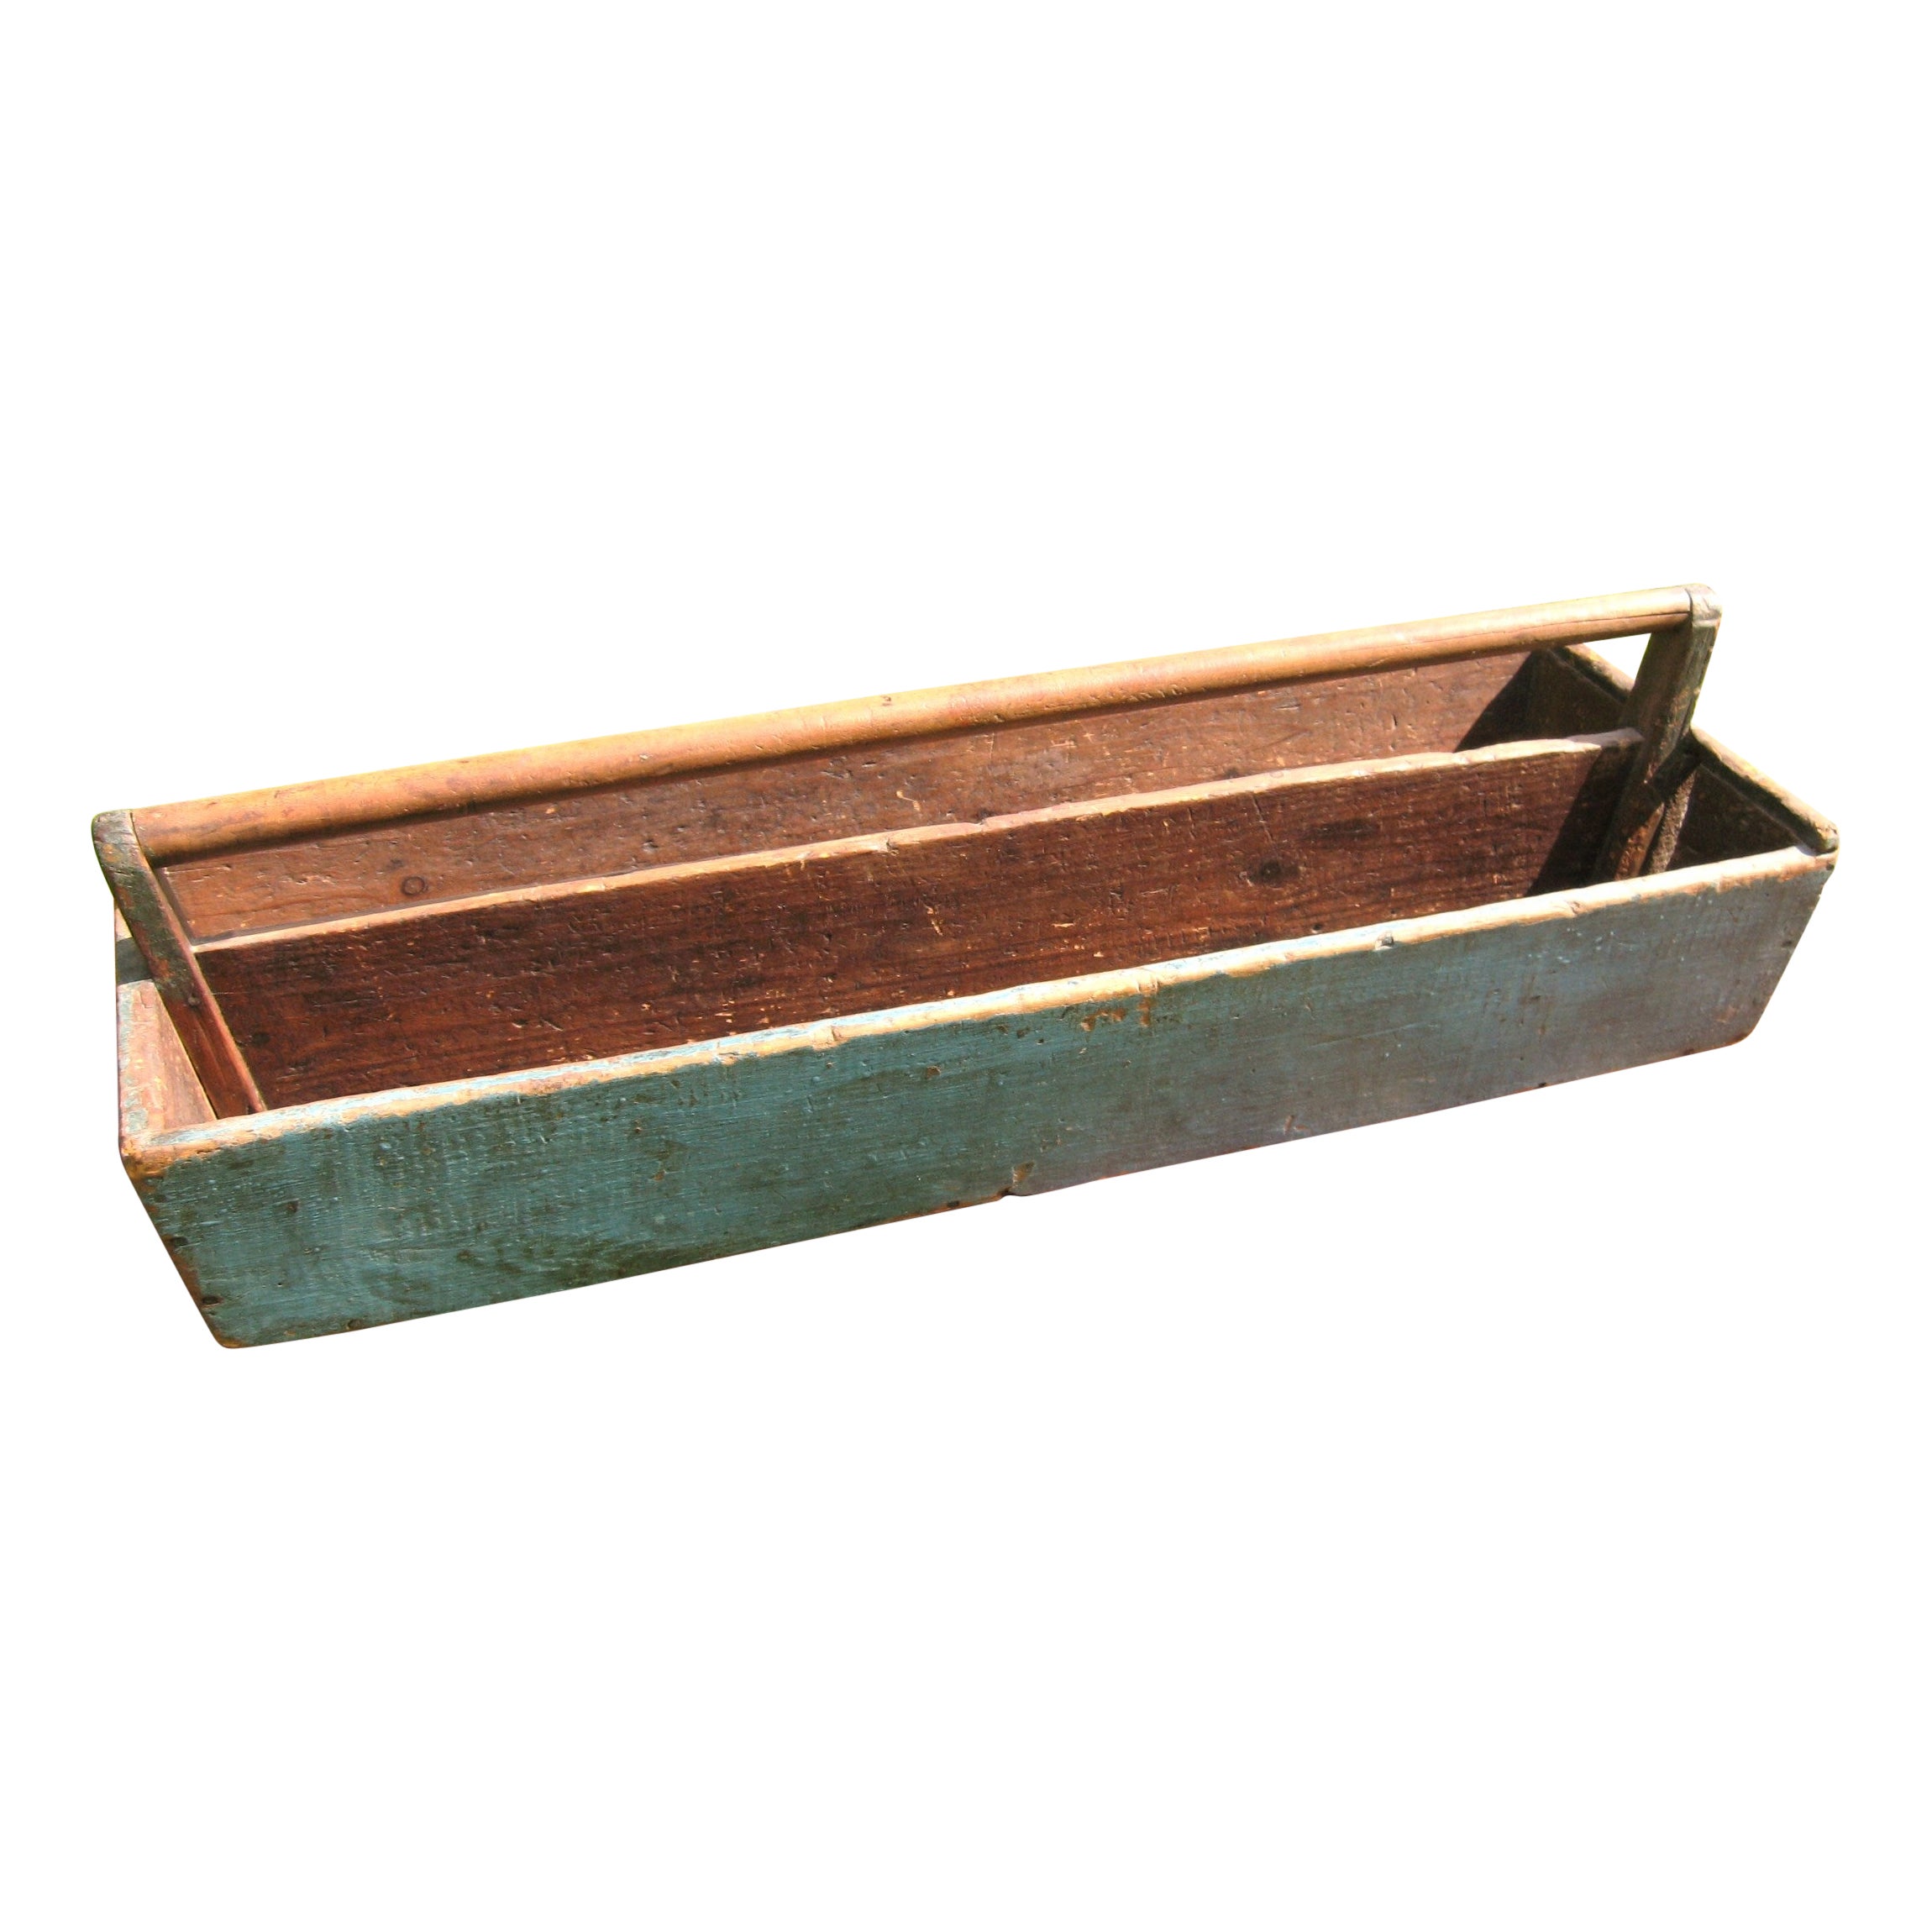 Early Primitive Robin Egg Blue Painted Tool Knife Box, 1860s